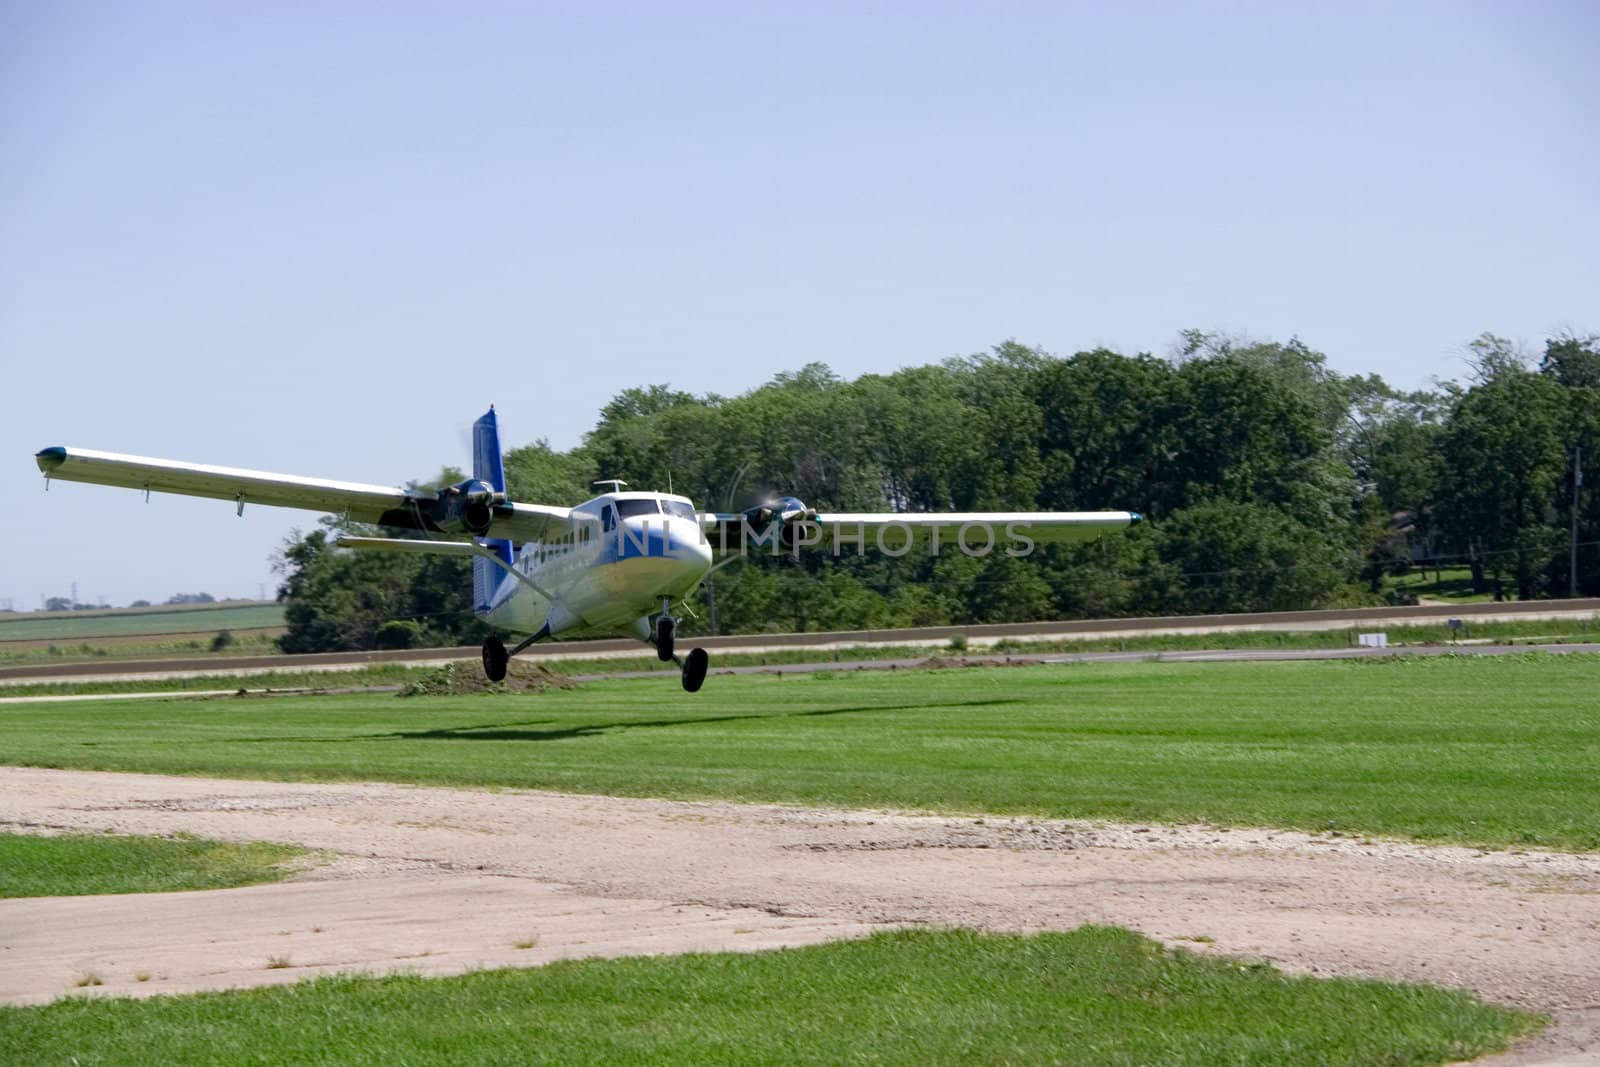 This is a medium sized twin engine propeller airplane landing on a grass landing strip.